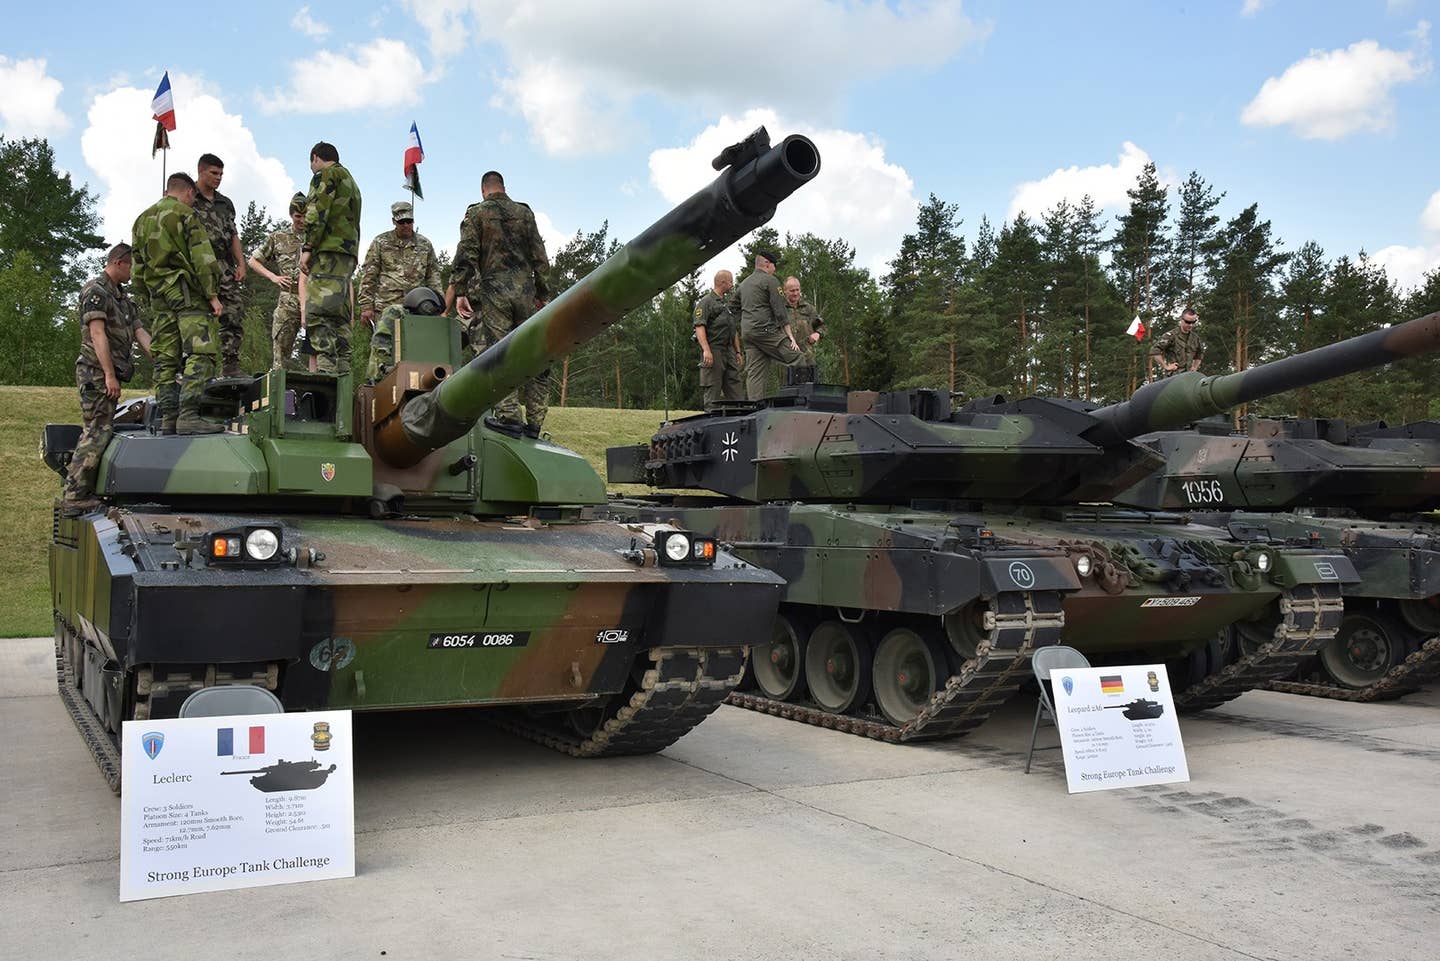 A French Army Leclerc and a Germany Army Leopard 2A6 during an inspection ahead of the Strong Europe Tank Challenge, held at the U.S. 7th Army Training Command’s Grafenwoehr Training Area, Germany, in 2018. <em>U.S. Army</em><a href="https://api.army.mil/e2/c/images/2018/06/06/519908/original.jpg" target="_blank" rel="noreferrer noopener"></a>